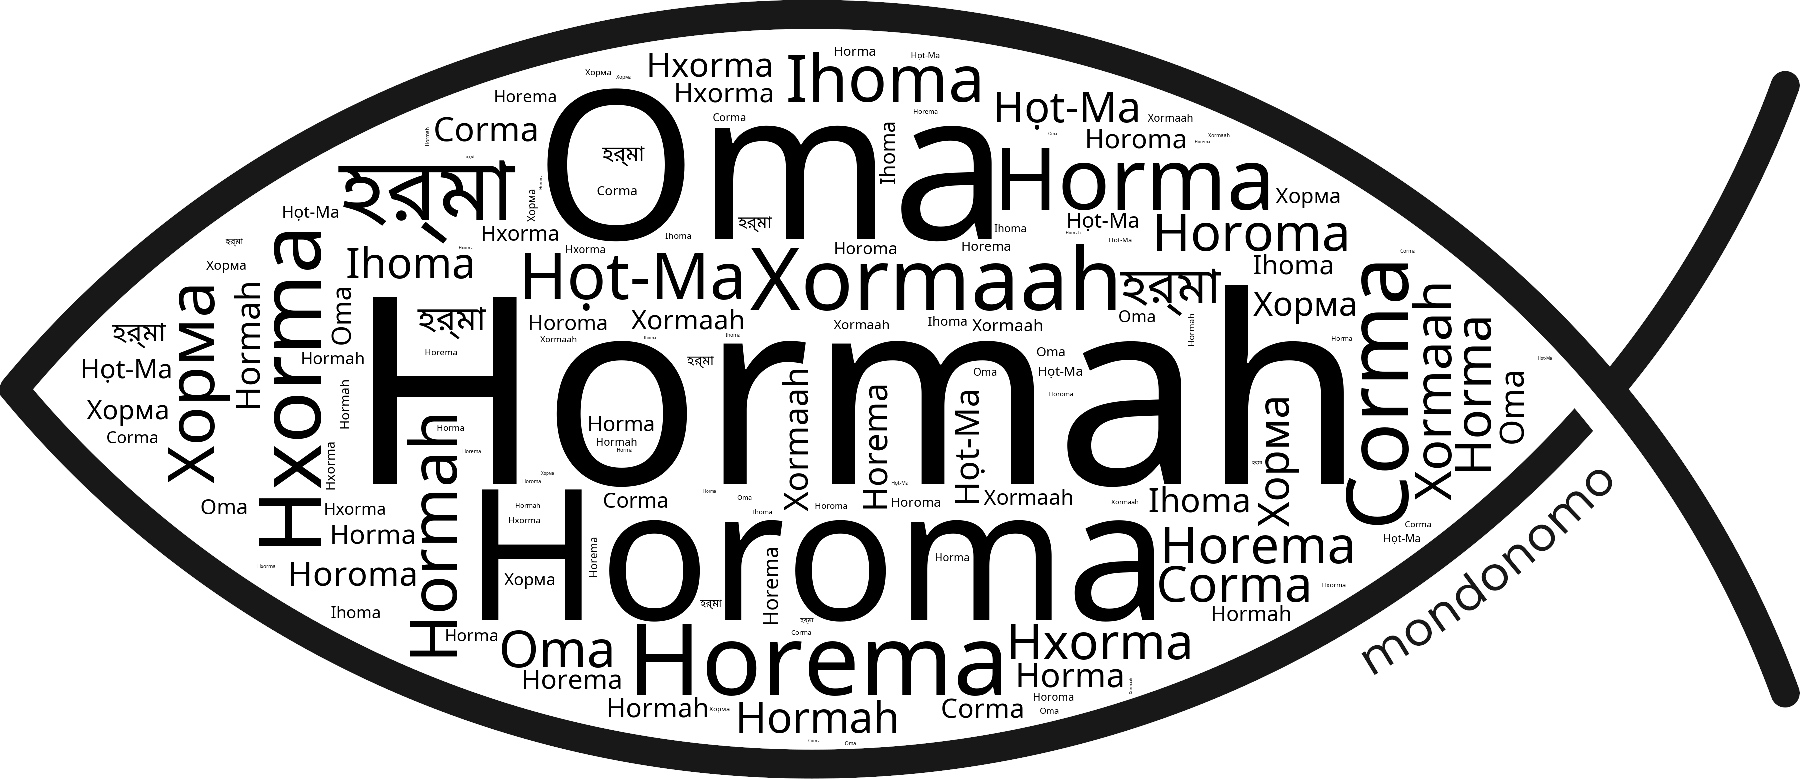 Name Hormah in the world's Bibles